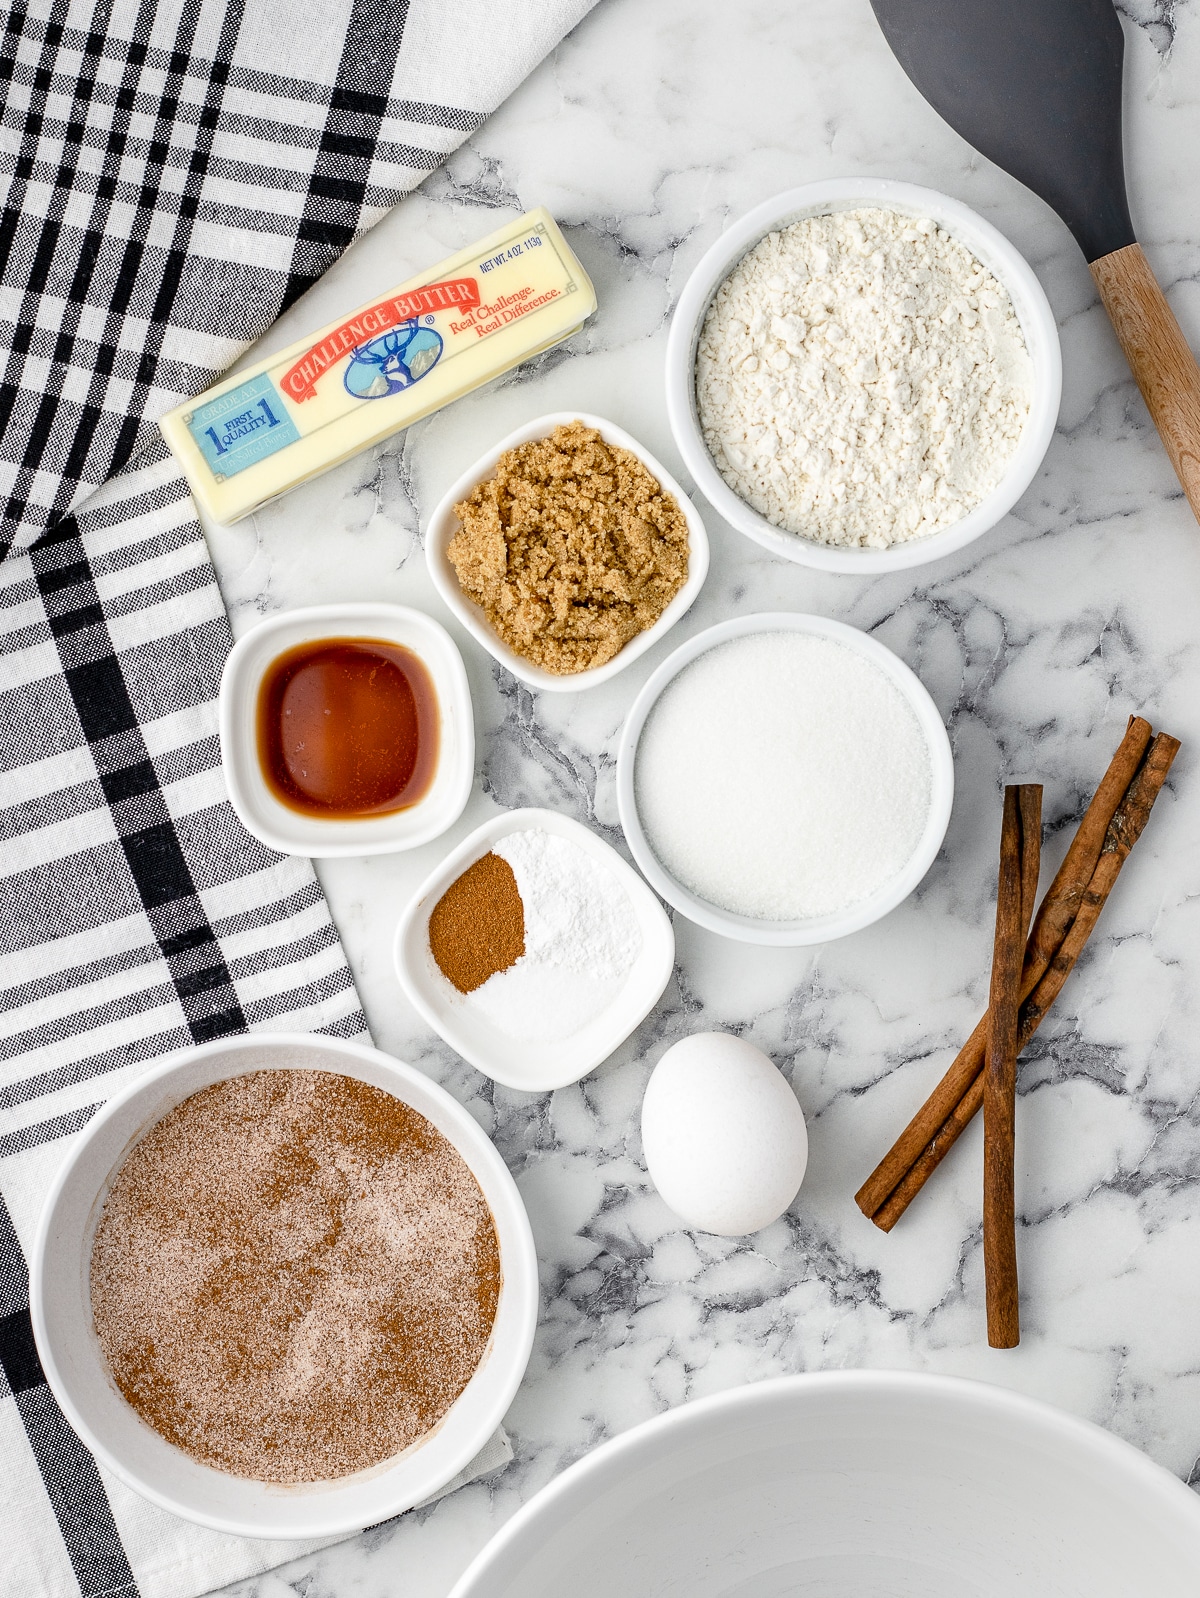 Ingredients for Snickerdoodles without cream of tartar. Unsalted butter, granulated sugar, brown sugar, vanilla extract, egg, all purpose flour, baking powder, cinnamon, salt, cinnamon sugar coating.